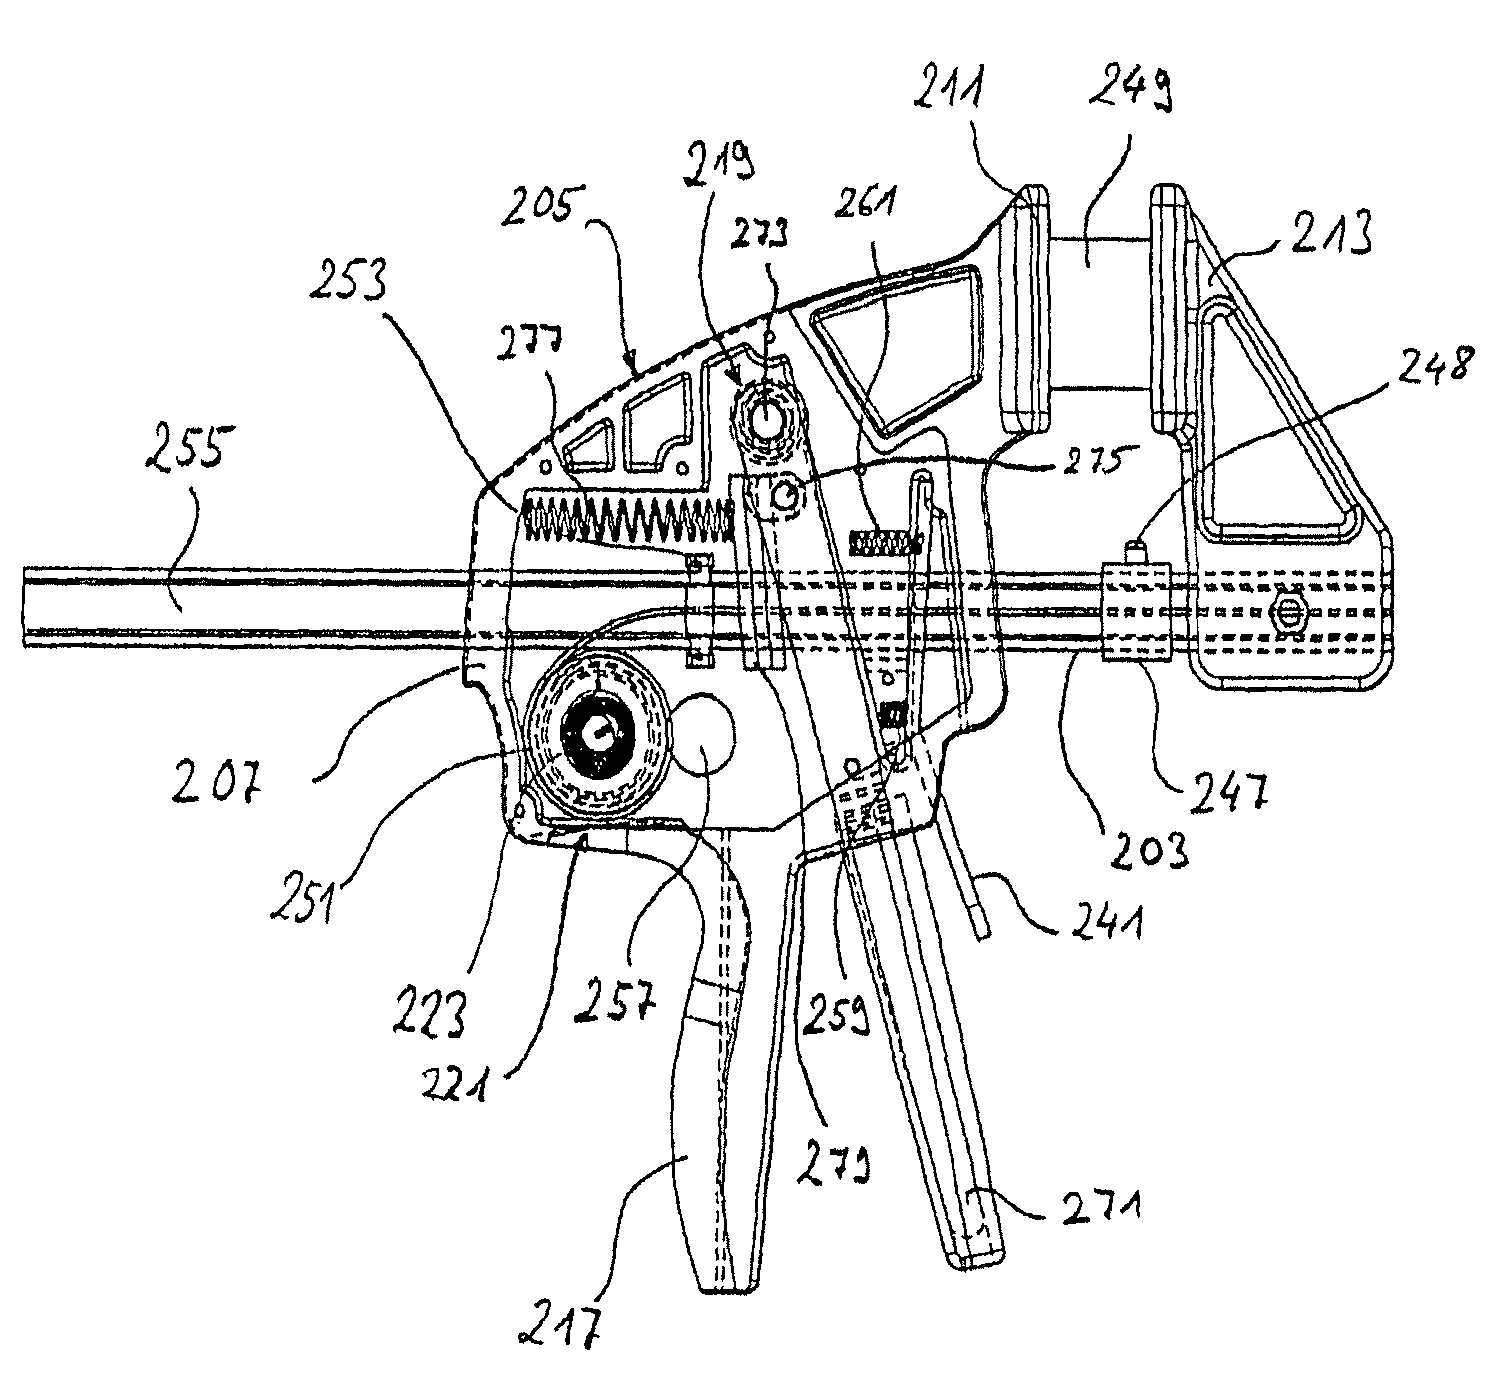 Clamping or spreading tool